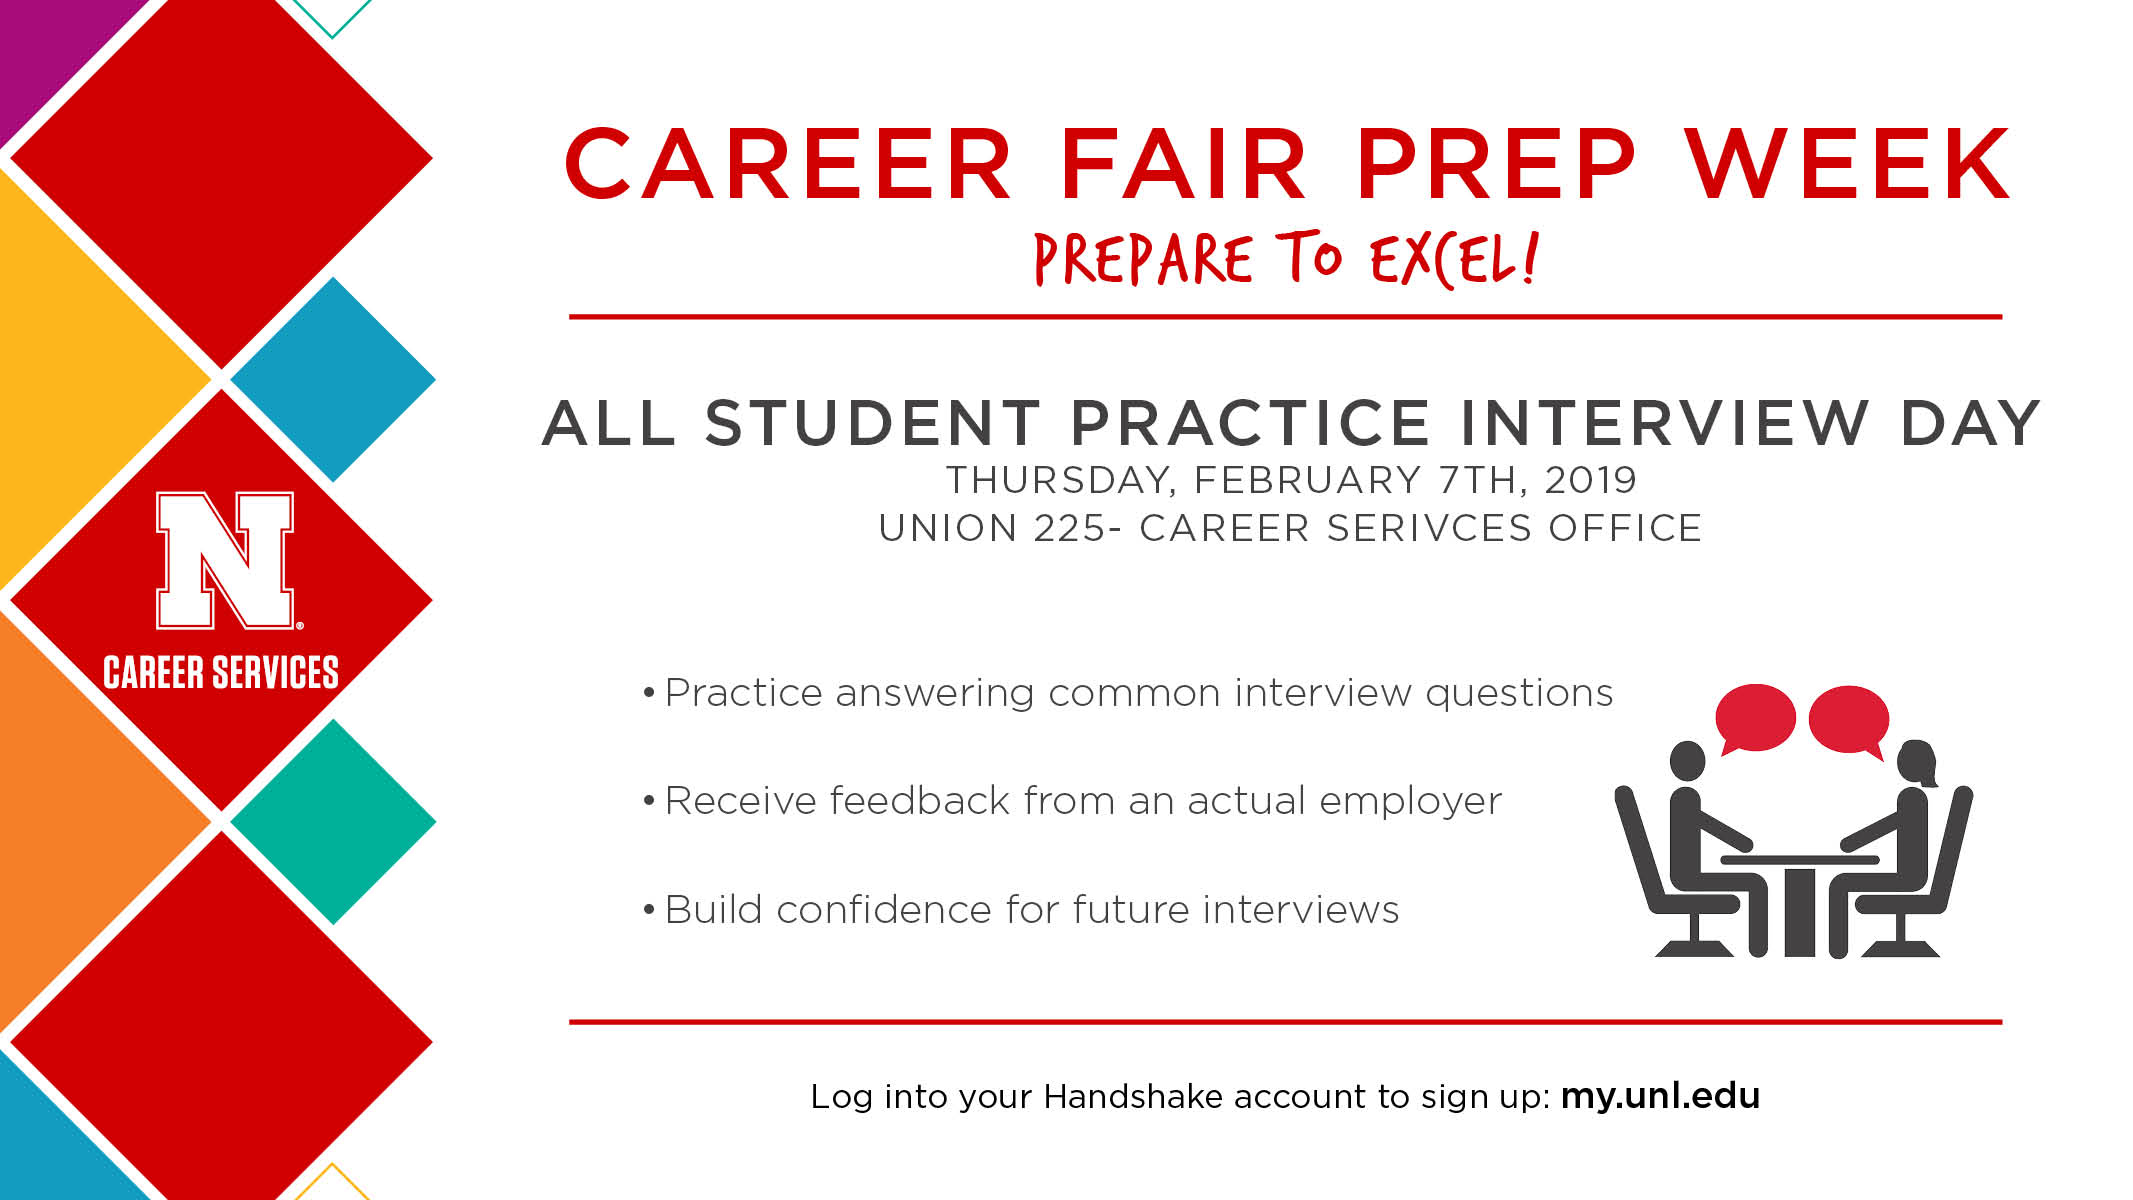 All Student Practice Interview Day